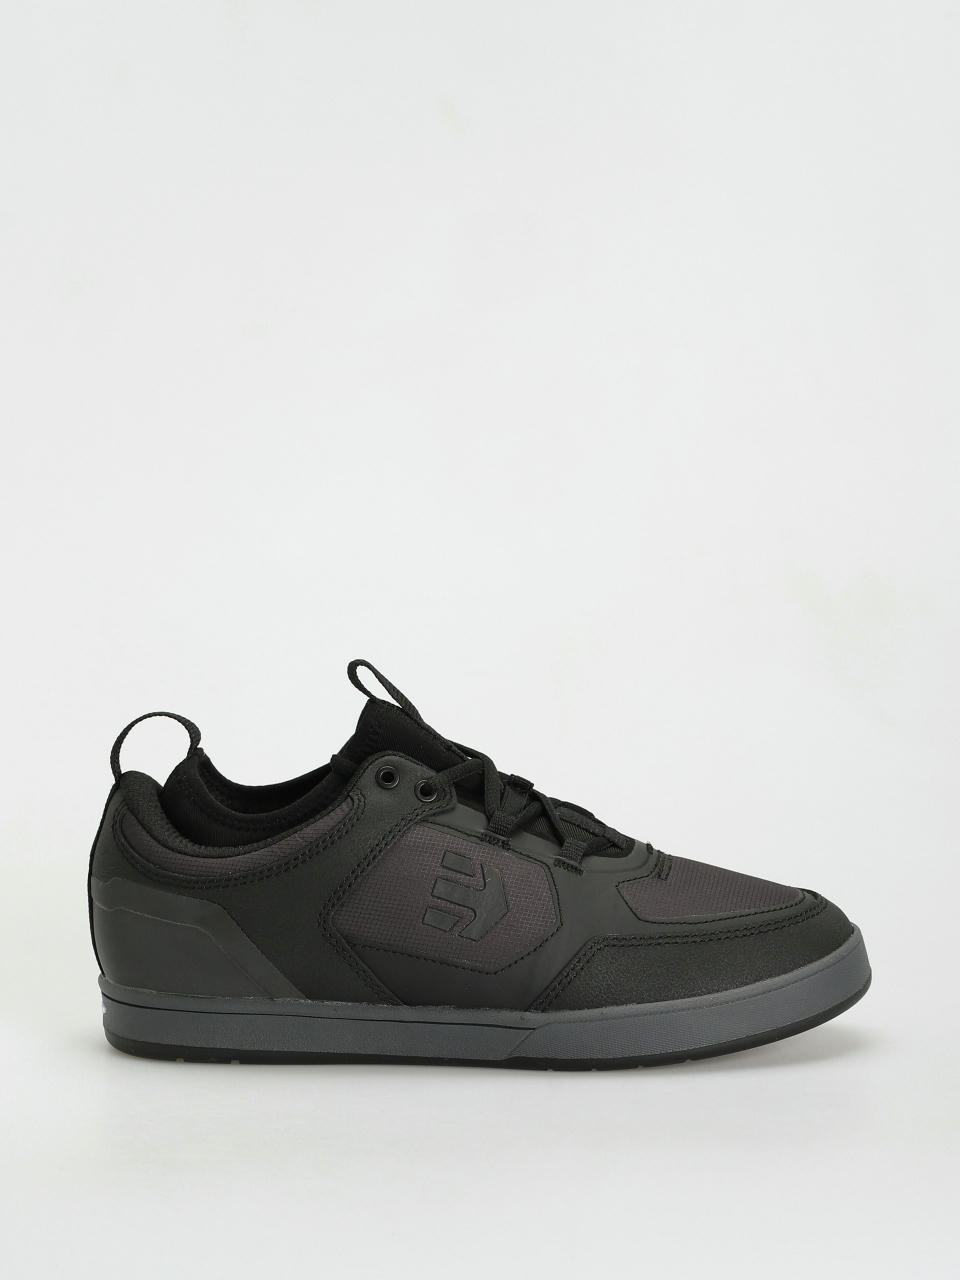 Topánky Etnies Camber Pro Wr (black)